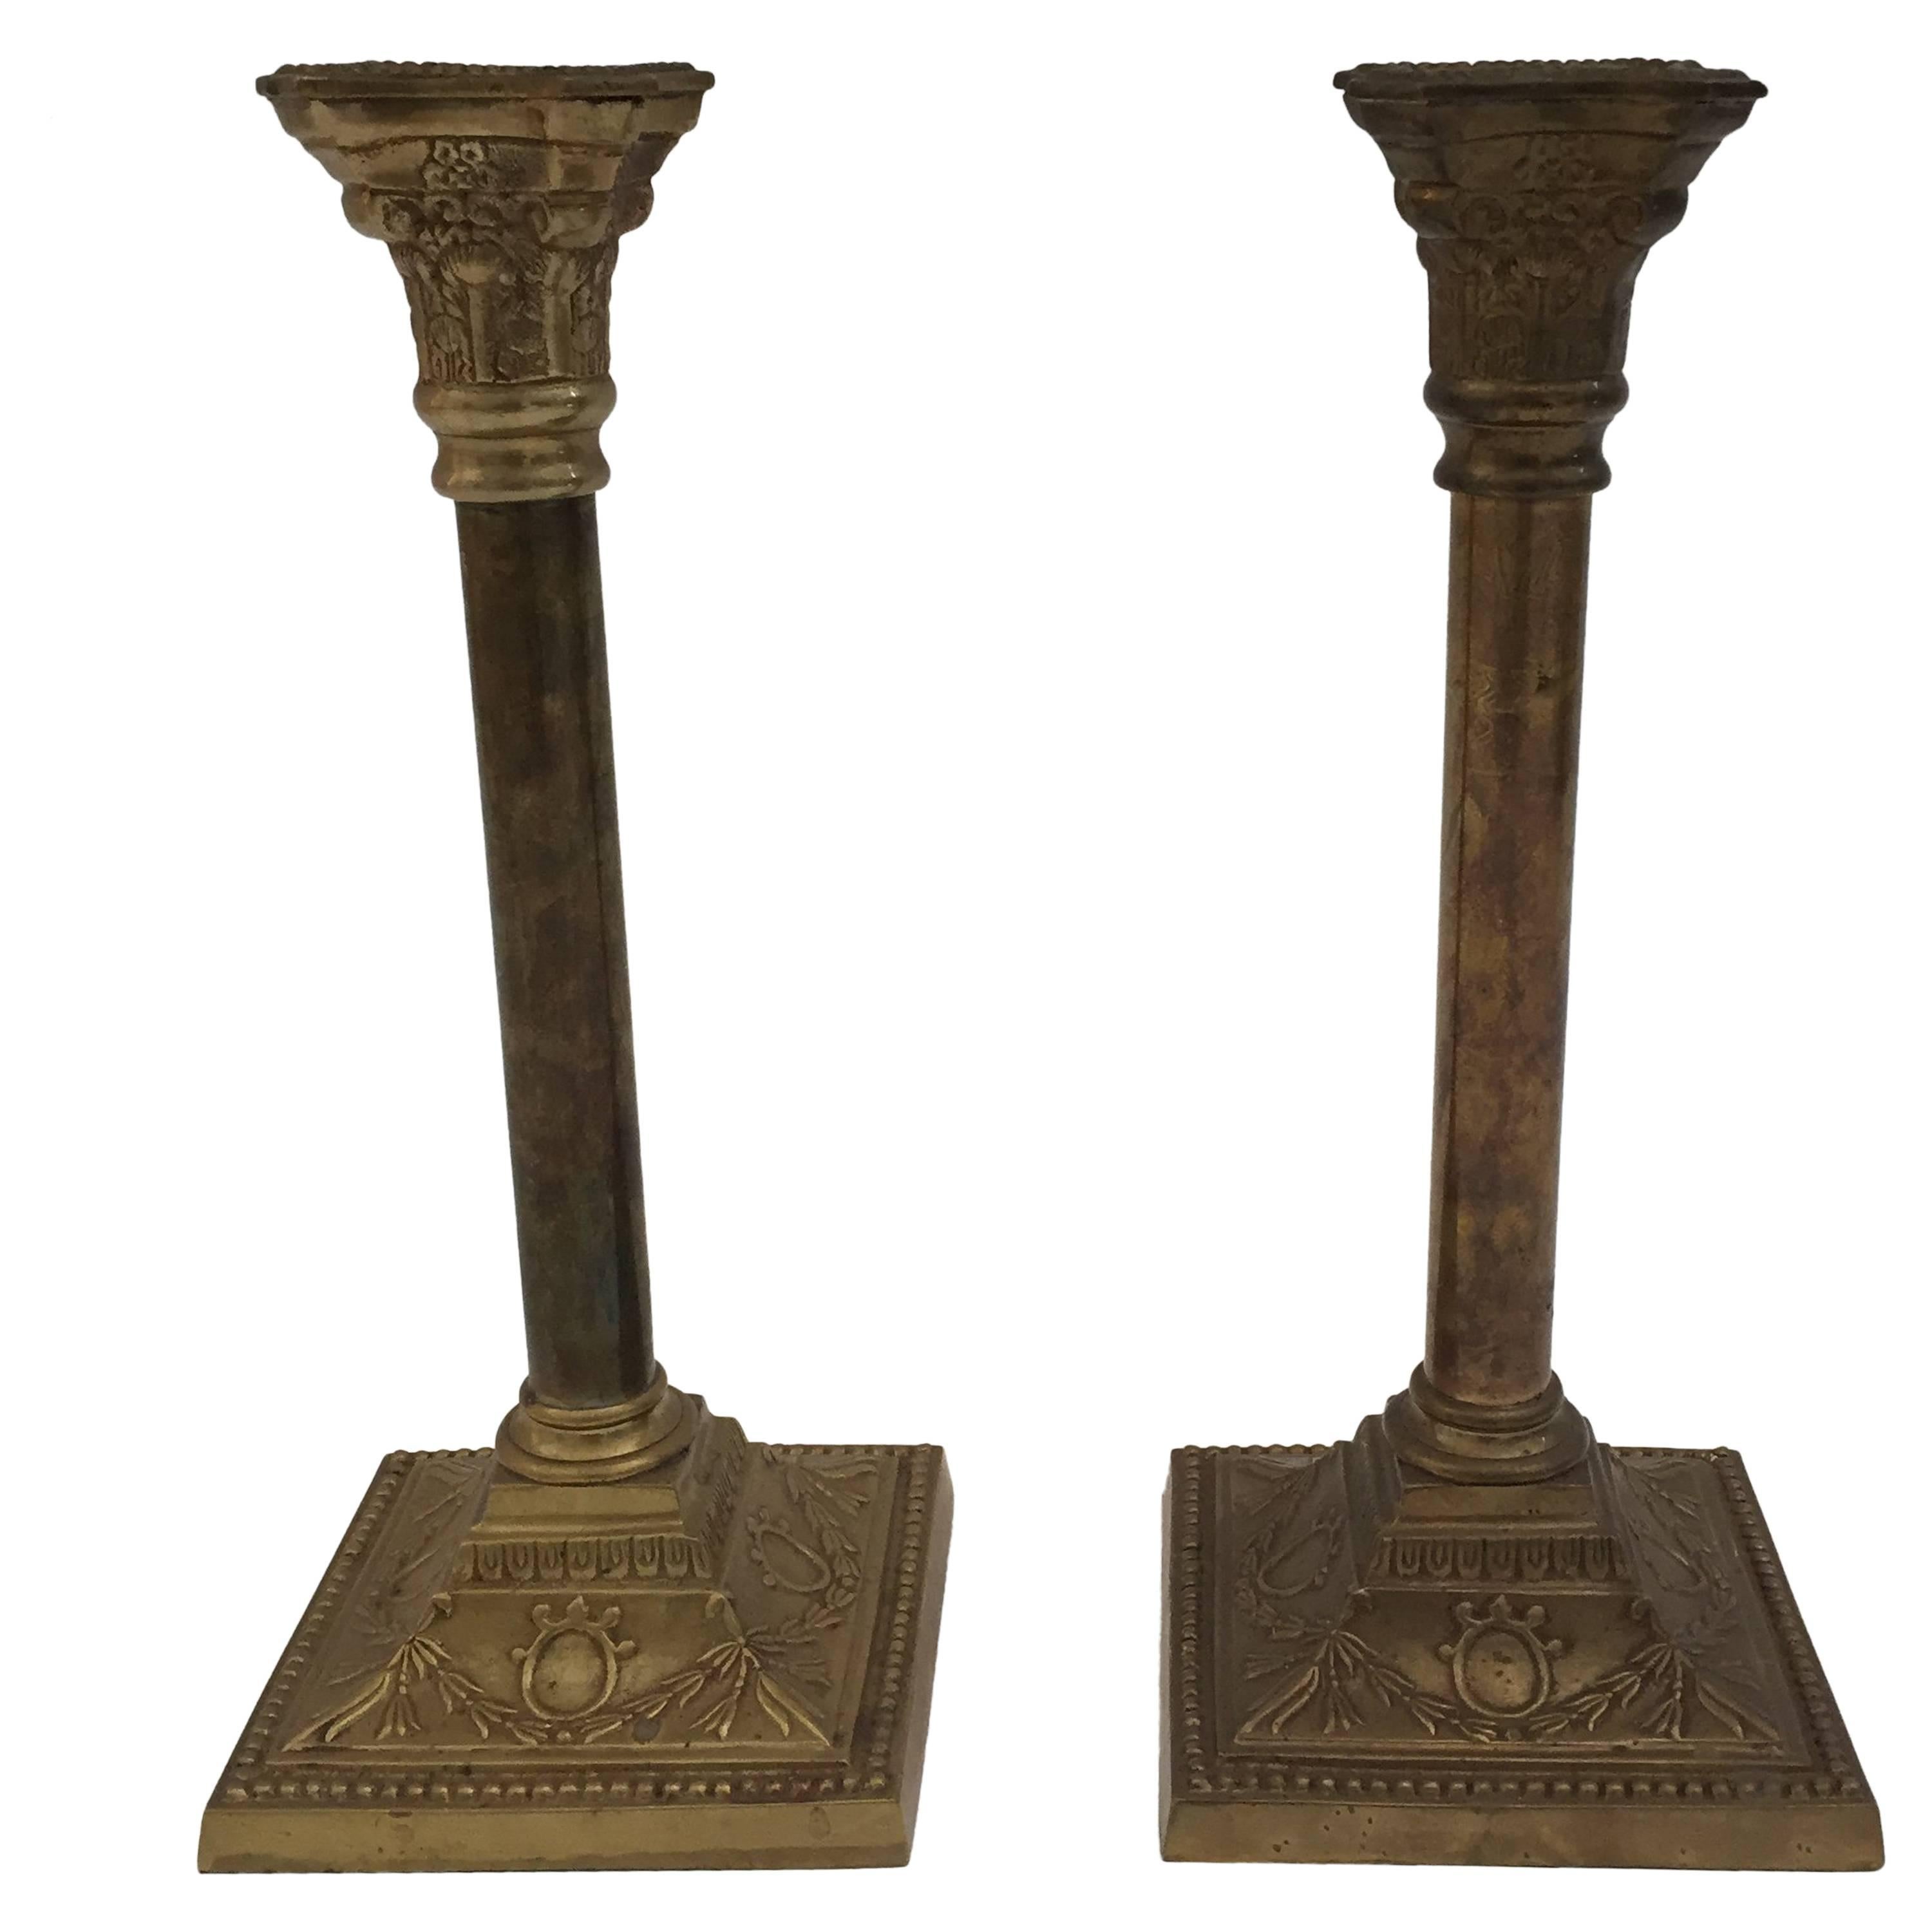 A very nice pair of George III Victorian neoclassical brass candlesticks with square bases and columnar shafts supporting urn form candle cups.
Early 20th Century English Georgian Brass Candlesticks - a Pair
Pair of Antique English Georgian Period